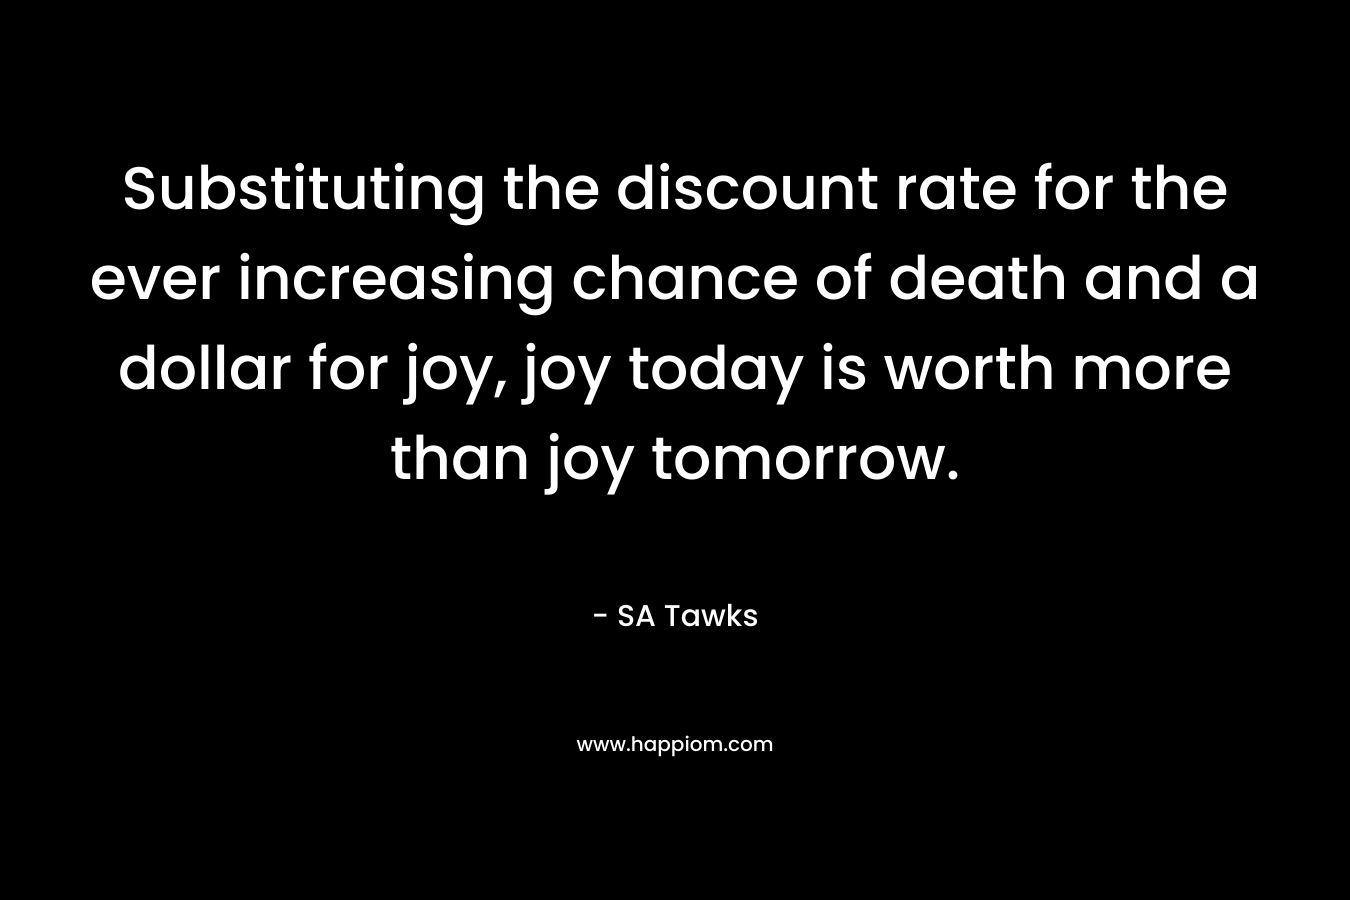 Substituting the discount rate for the ever increasing chance of death and a dollar for joy, joy today is worth more than joy tomorrow. – SA Tawks